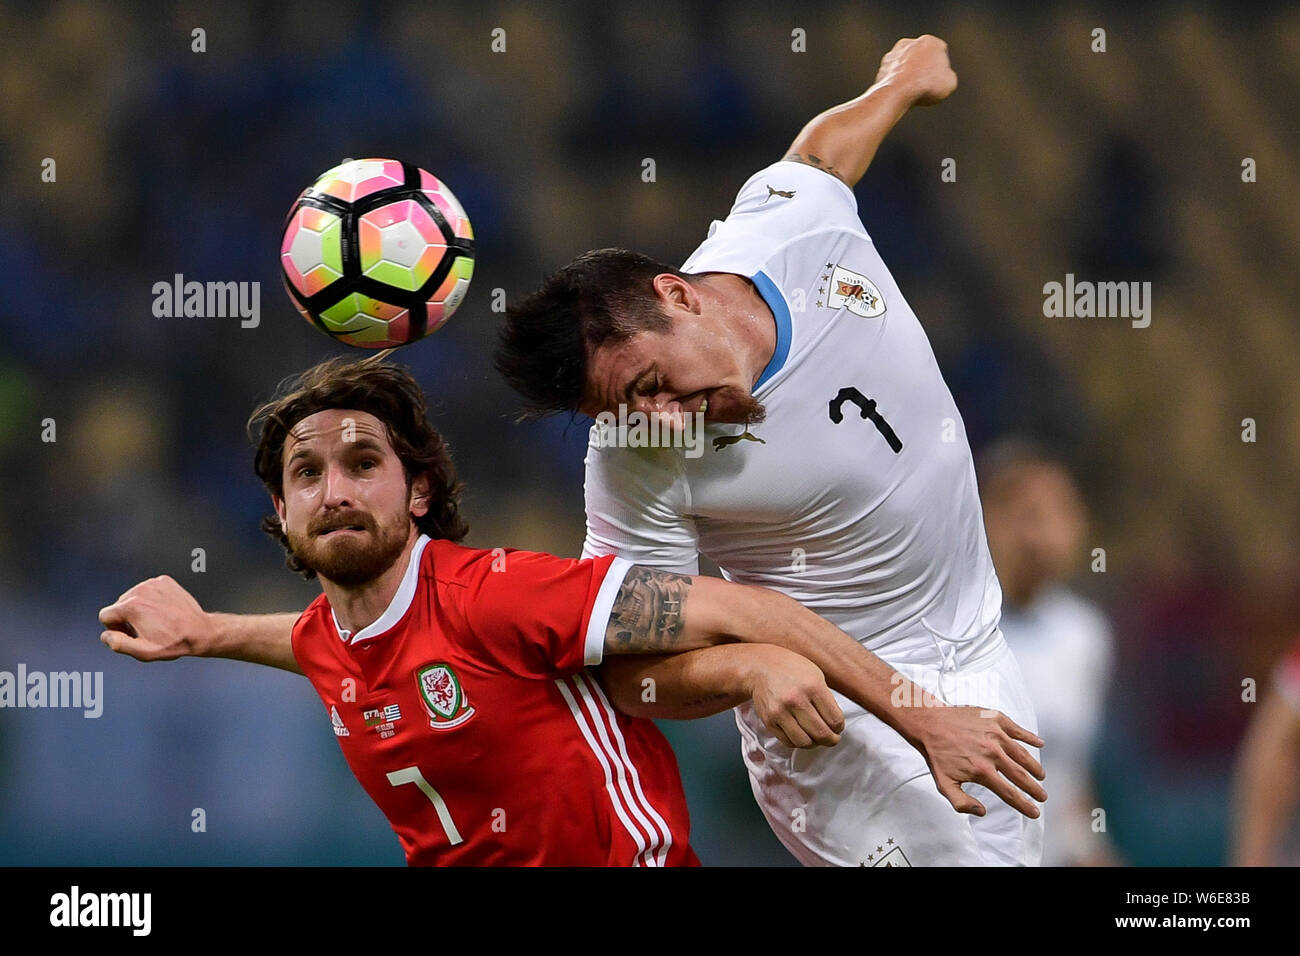 Joe Allen, left, of Wales national football team heads the ball to make a pass against Cristian Rodriguez of Uruguay national football team in their f Stock Photo